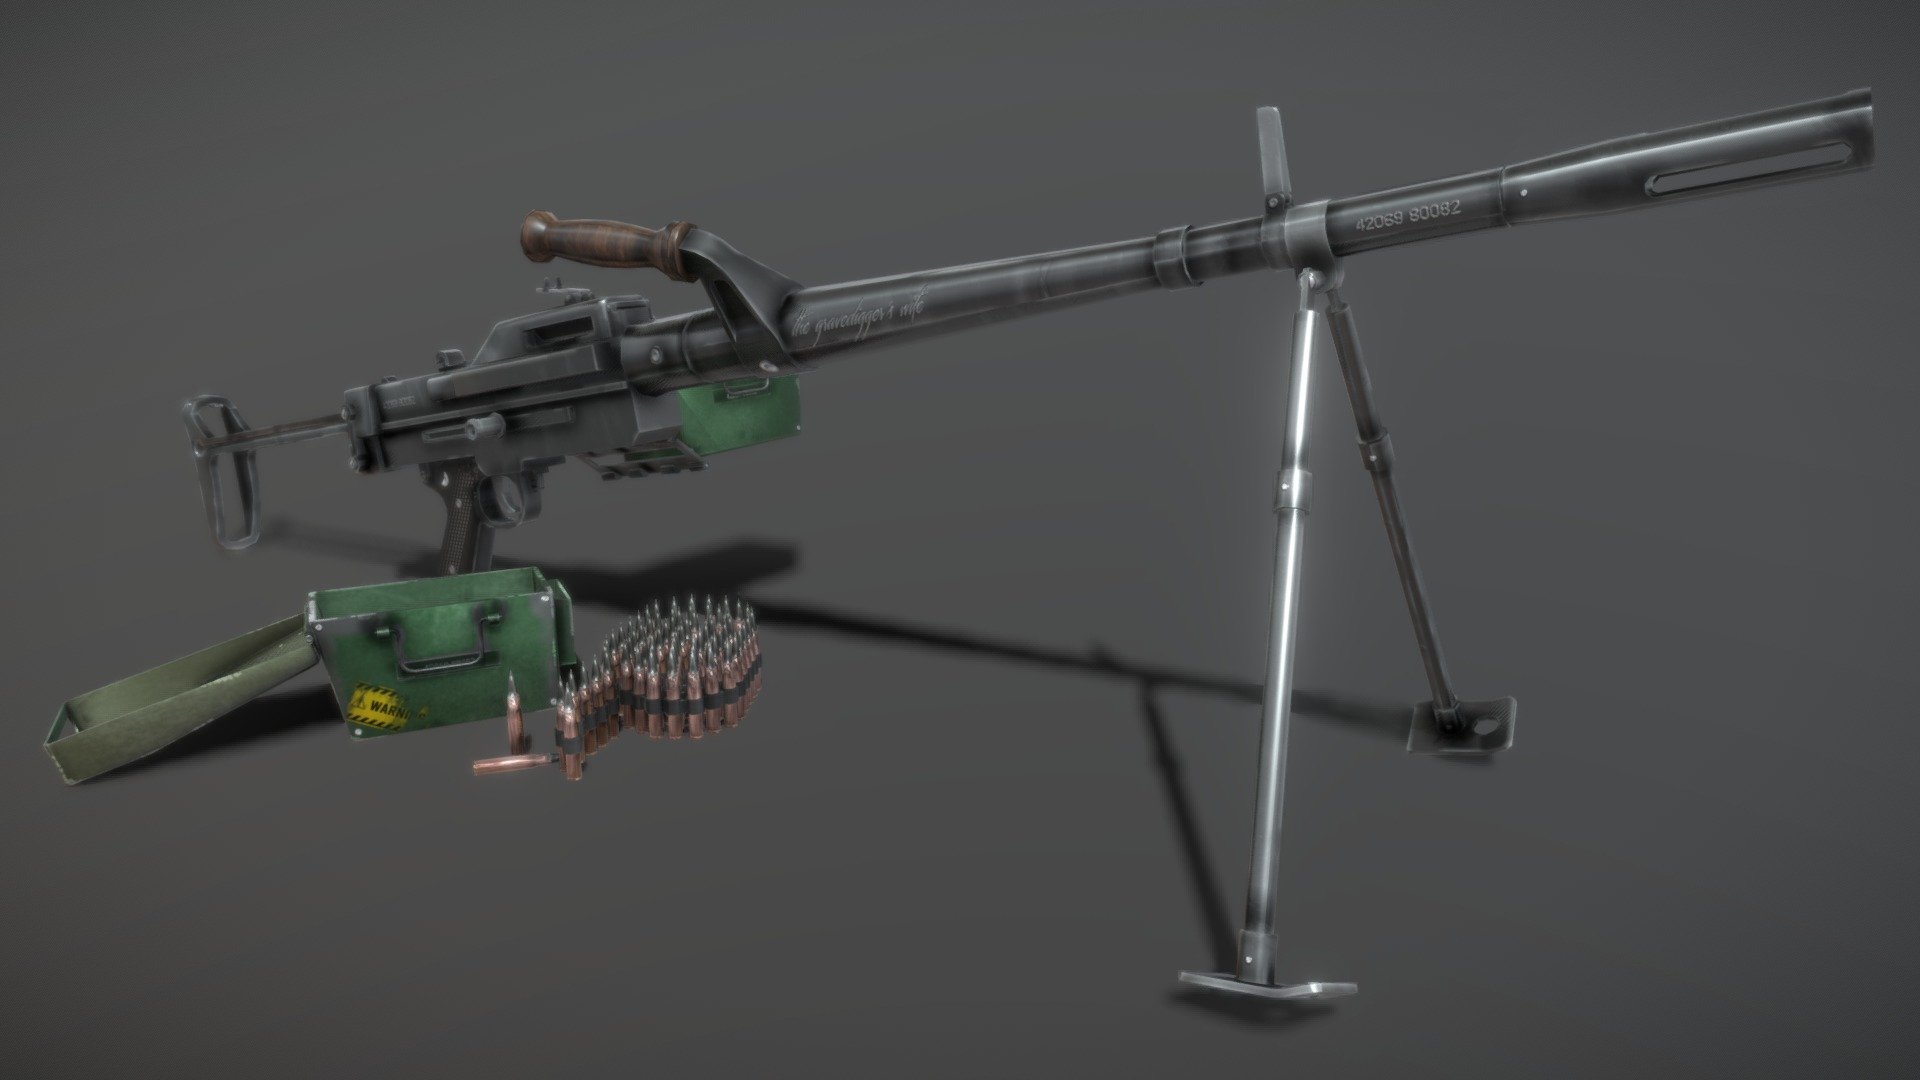 The TGW-52, French Machine gun in service since 1952

–   3D Model close to the original but partially reinterpreted
–   Proportions are partially respected compared to the original weapon
–   Optimised for Game engine (Tested on Unity 3D)
–   Some parts are separated from the main model for a better  3D animation usecase.

Made with Cinema 4D
Textured with ArmorPaint

//////////////// Model informations ////////////////
–   Points : 32504
–   Polygons : 39620
–   Objects: 23
One material made of 4 Textures (20482048 px) for all the model  (Albedo (base), Normal, Metal, Rough*) - TGW-52 : French Machine gun - 3D model by Gwenaël Hervé (@Gwenael_Herve) 3d model